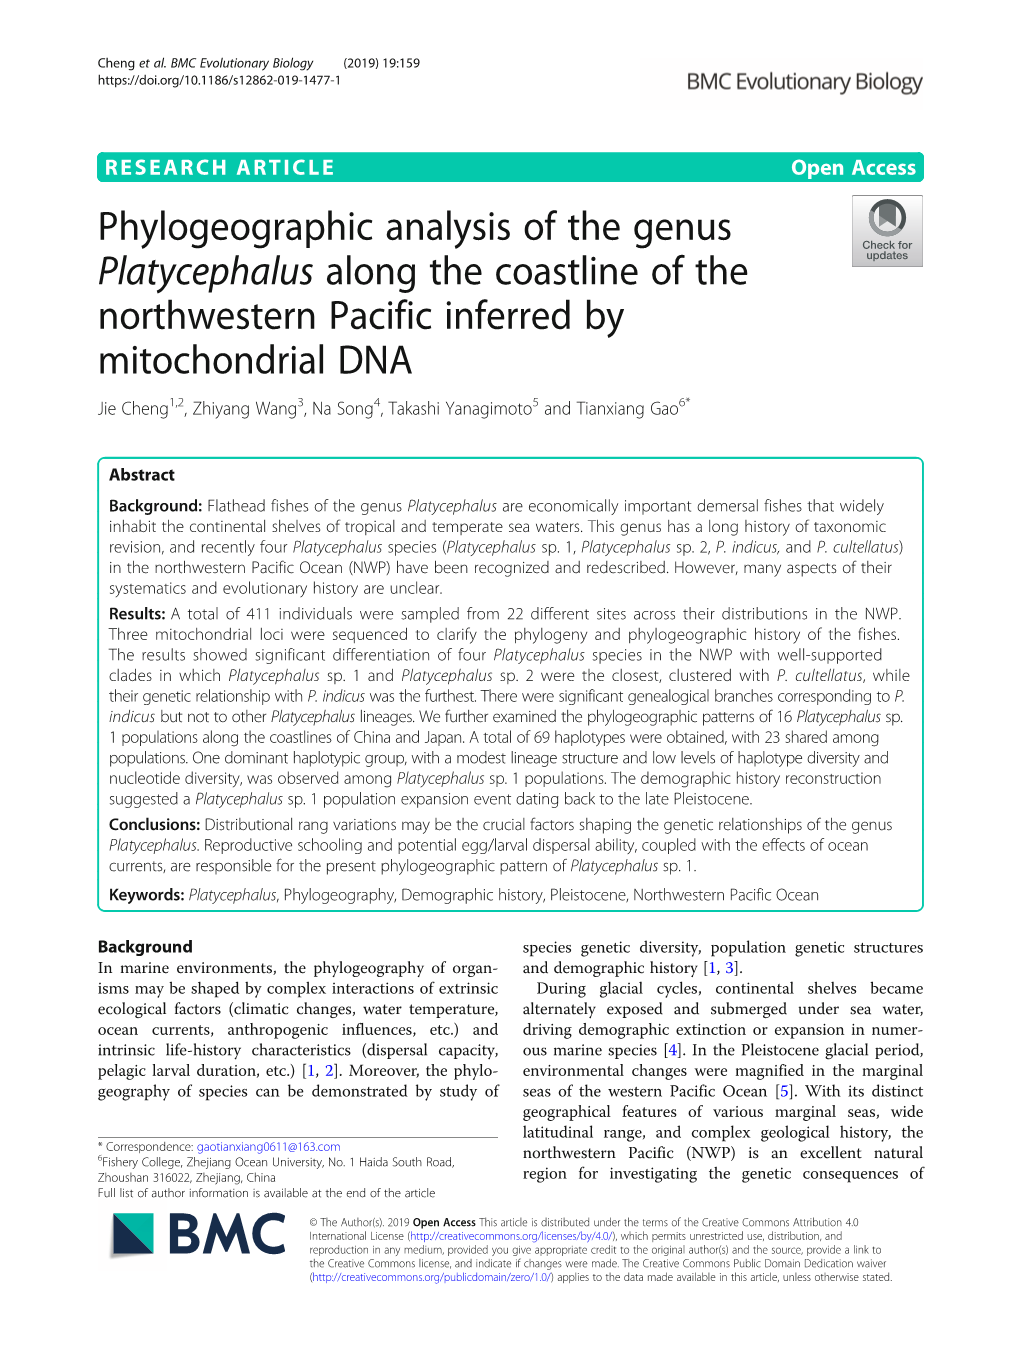 Phylogeographic Analysis of the Genus Platycephalus Along the Coastline of the Northwestern Pacific Inferred by Mitochondrial DN